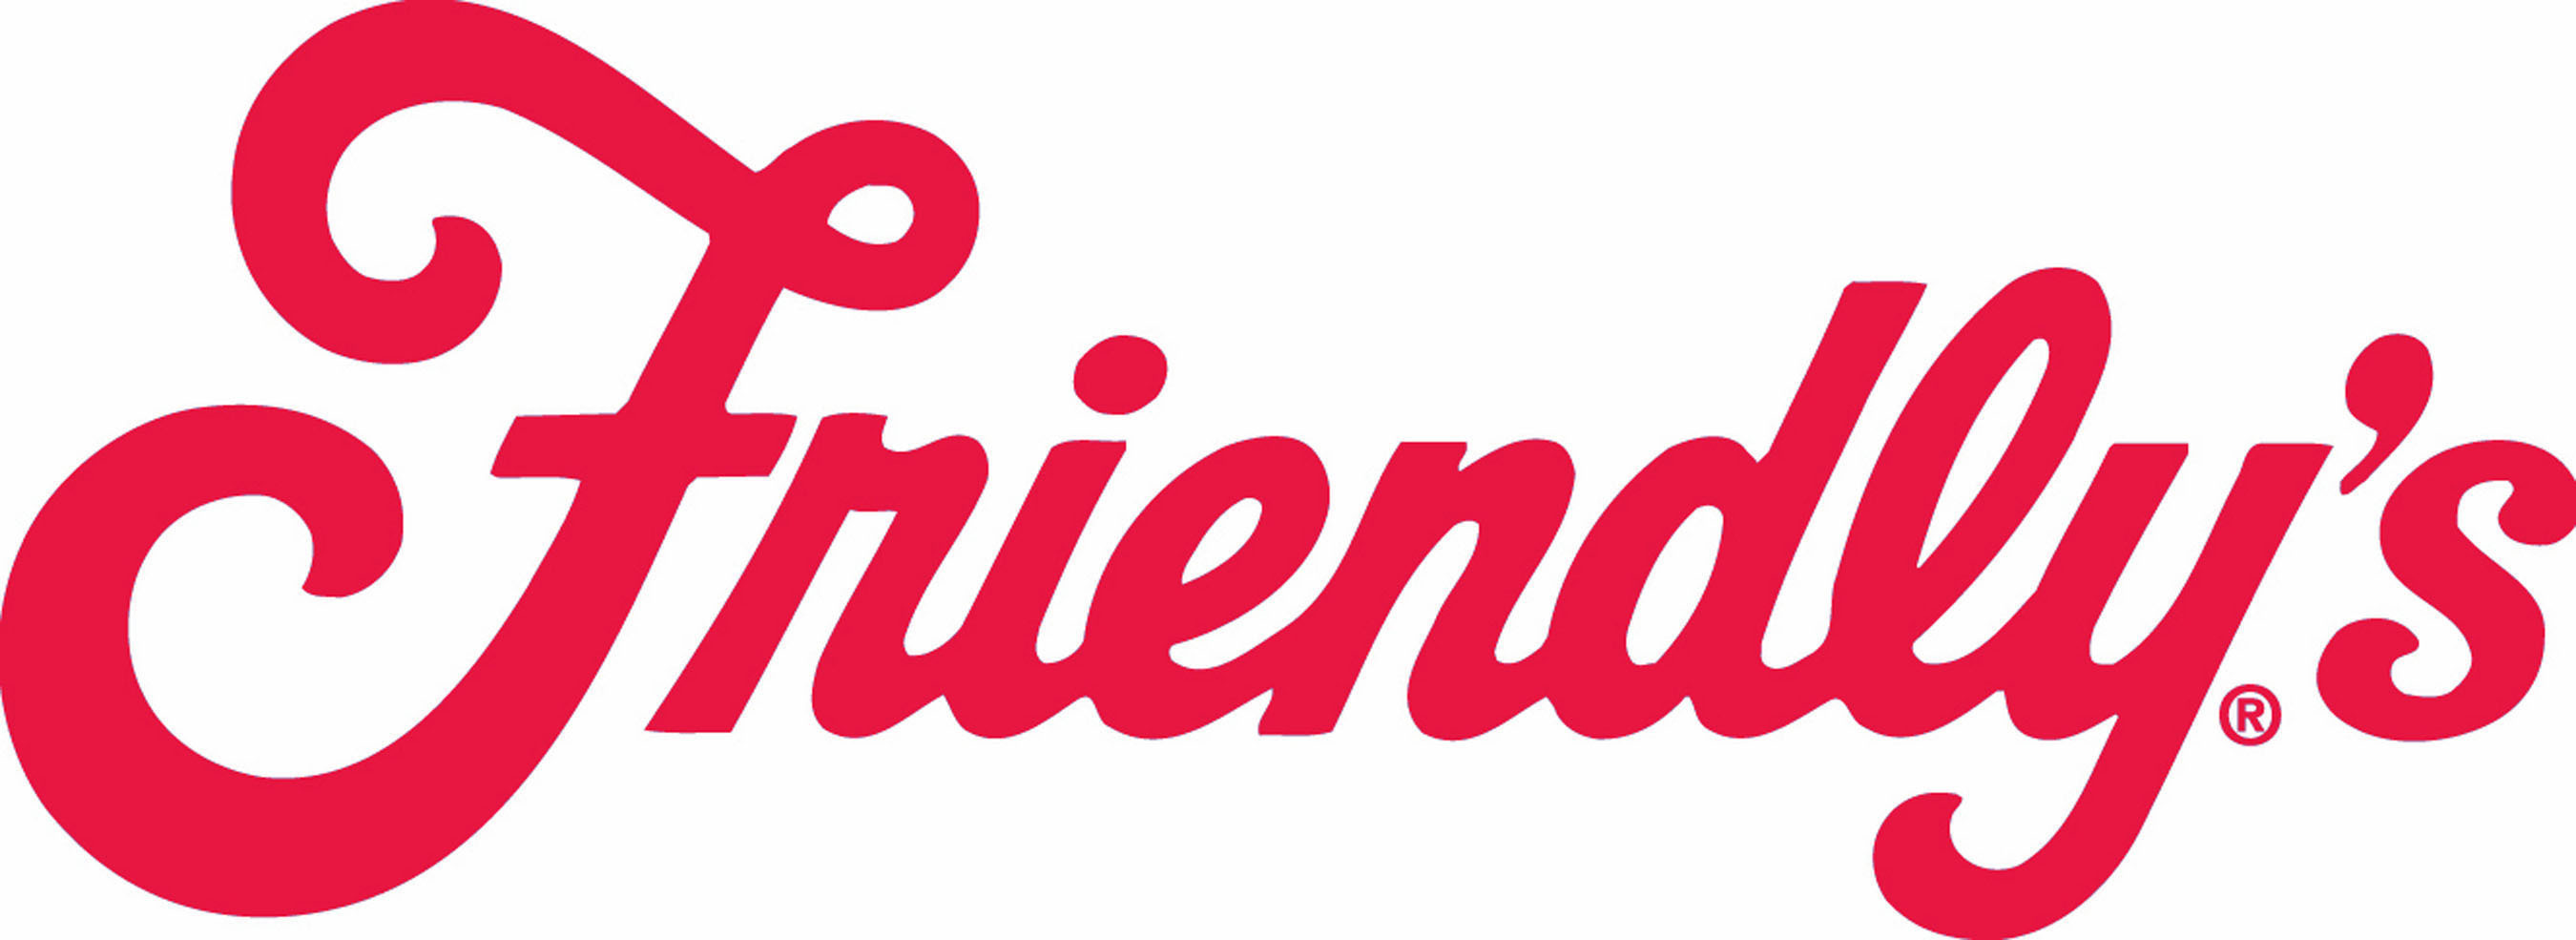 Official Logo for Friendly's Ice Cream LLC. (PRNewsFoto/Friendly's Ice Cream, LLC) (PRNewsFoto/)